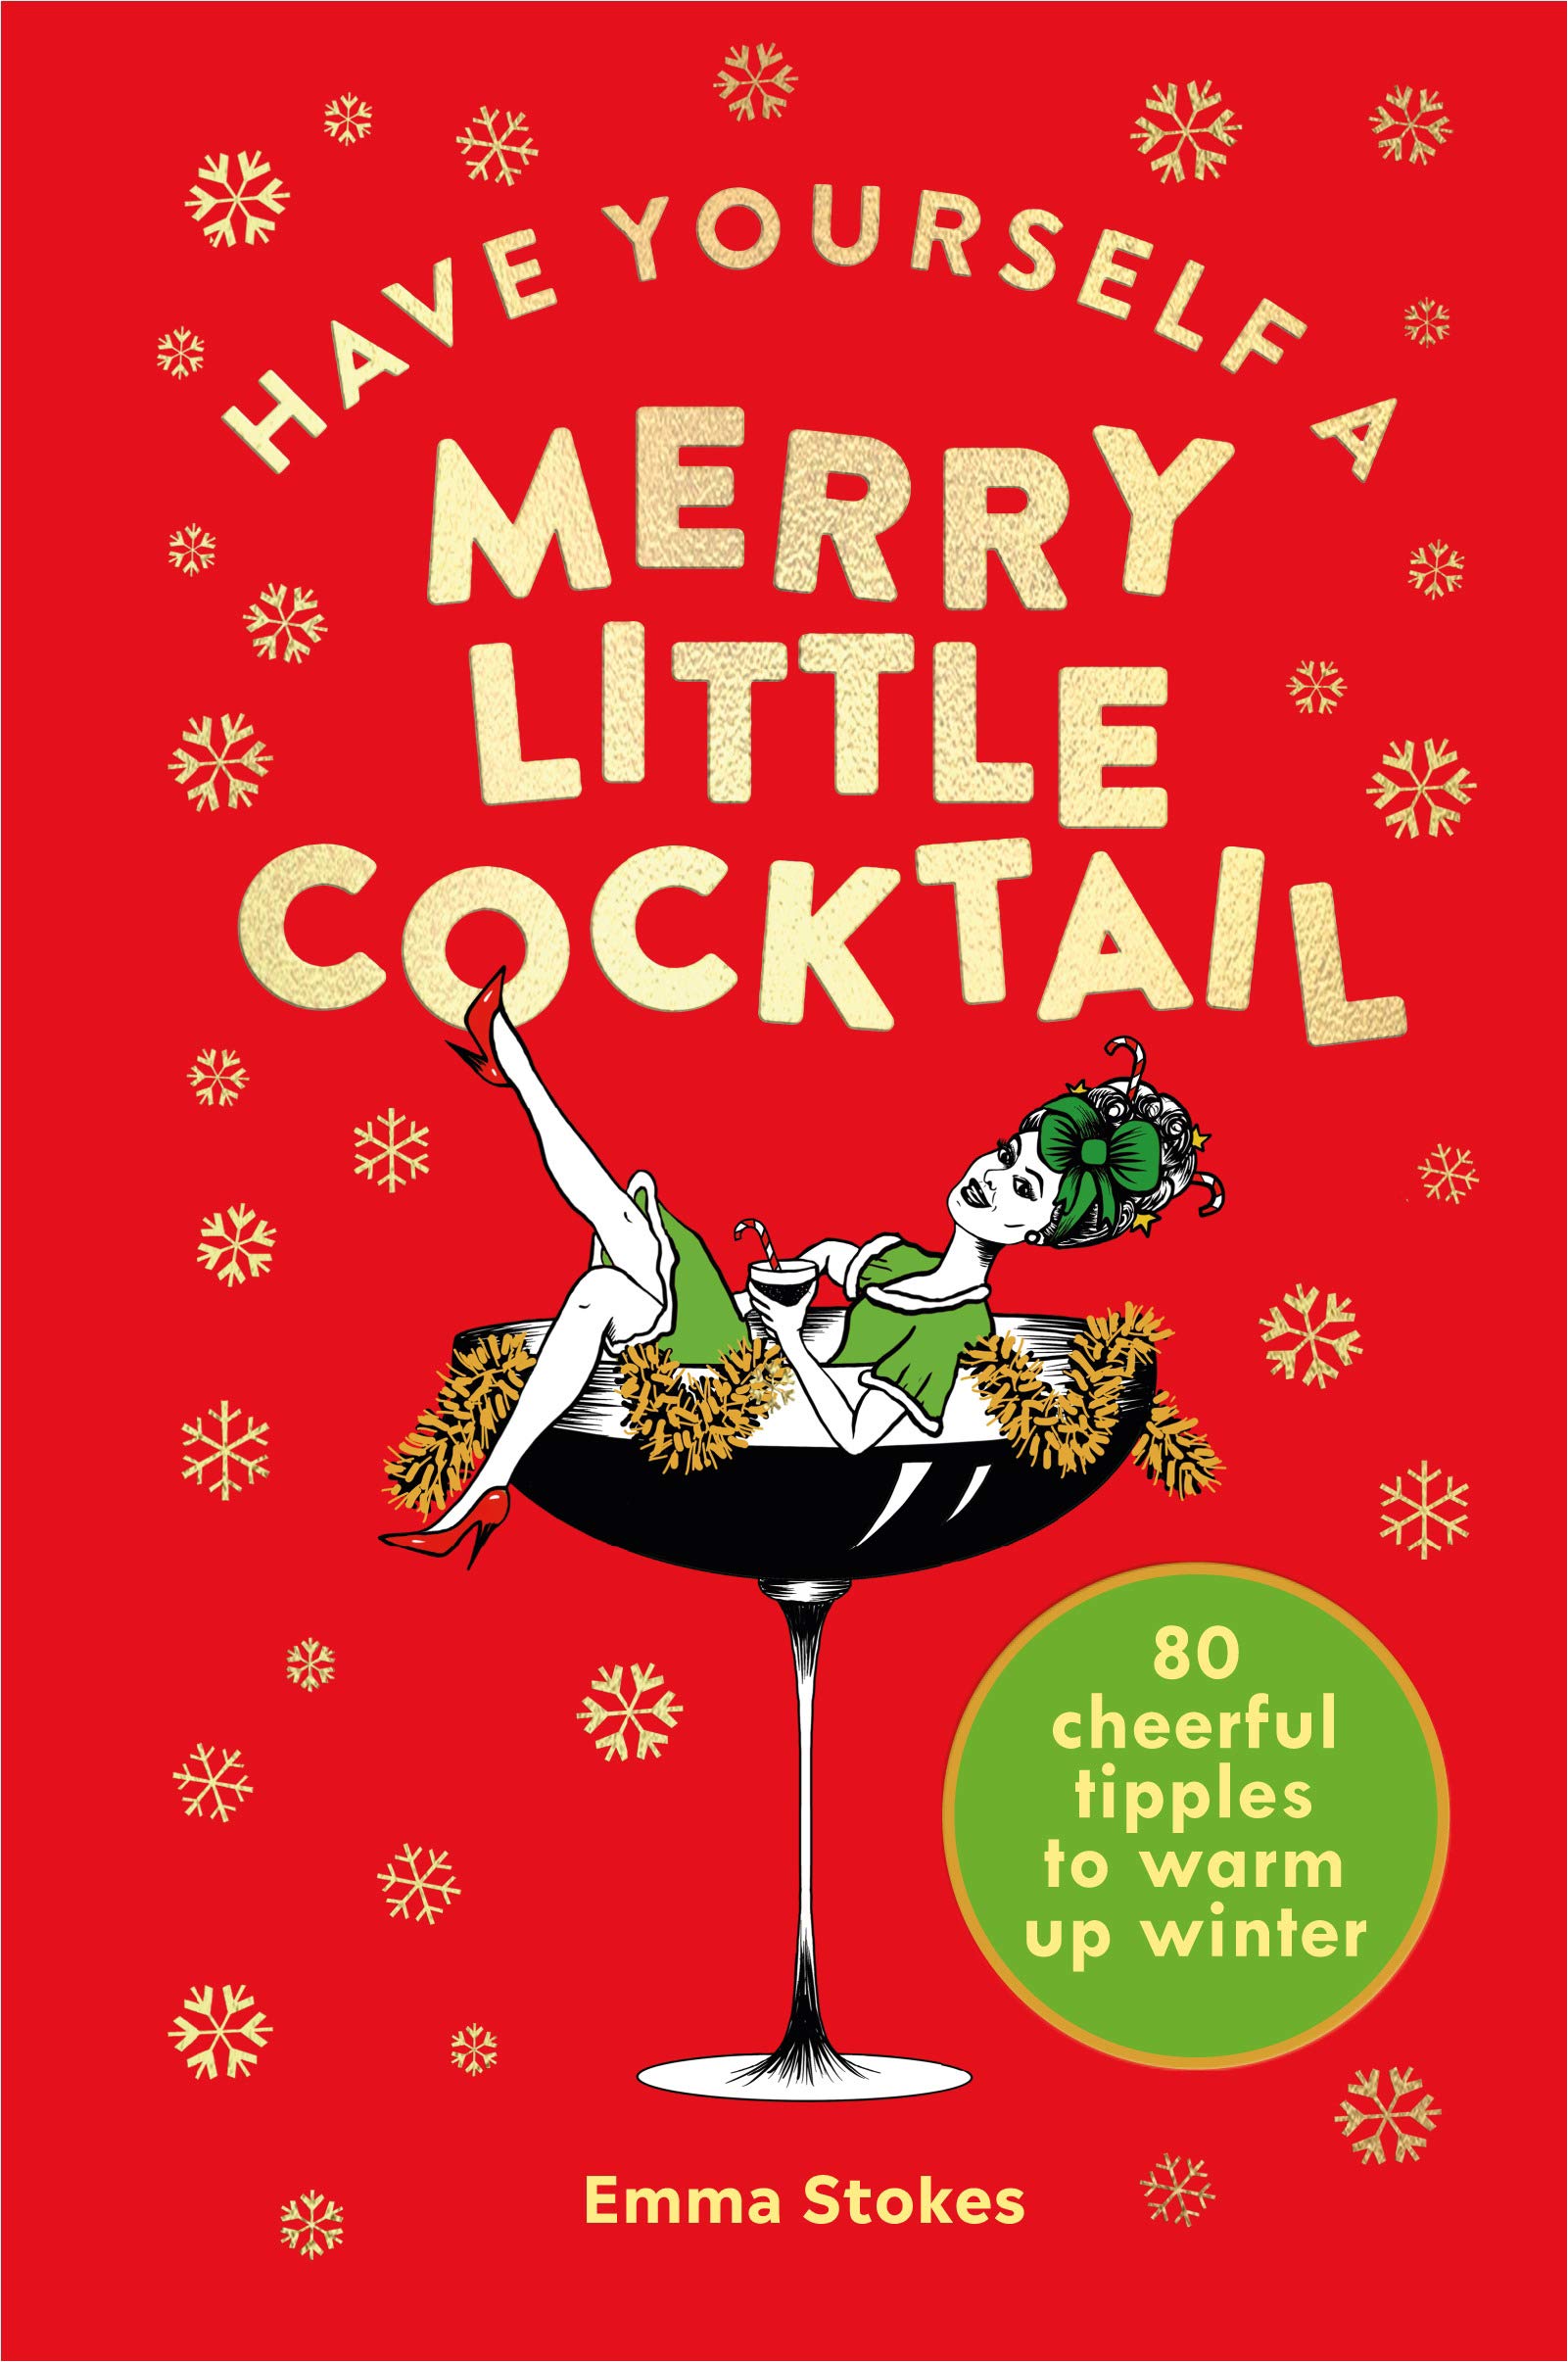 Have Yourself A Merry Little Cocktail